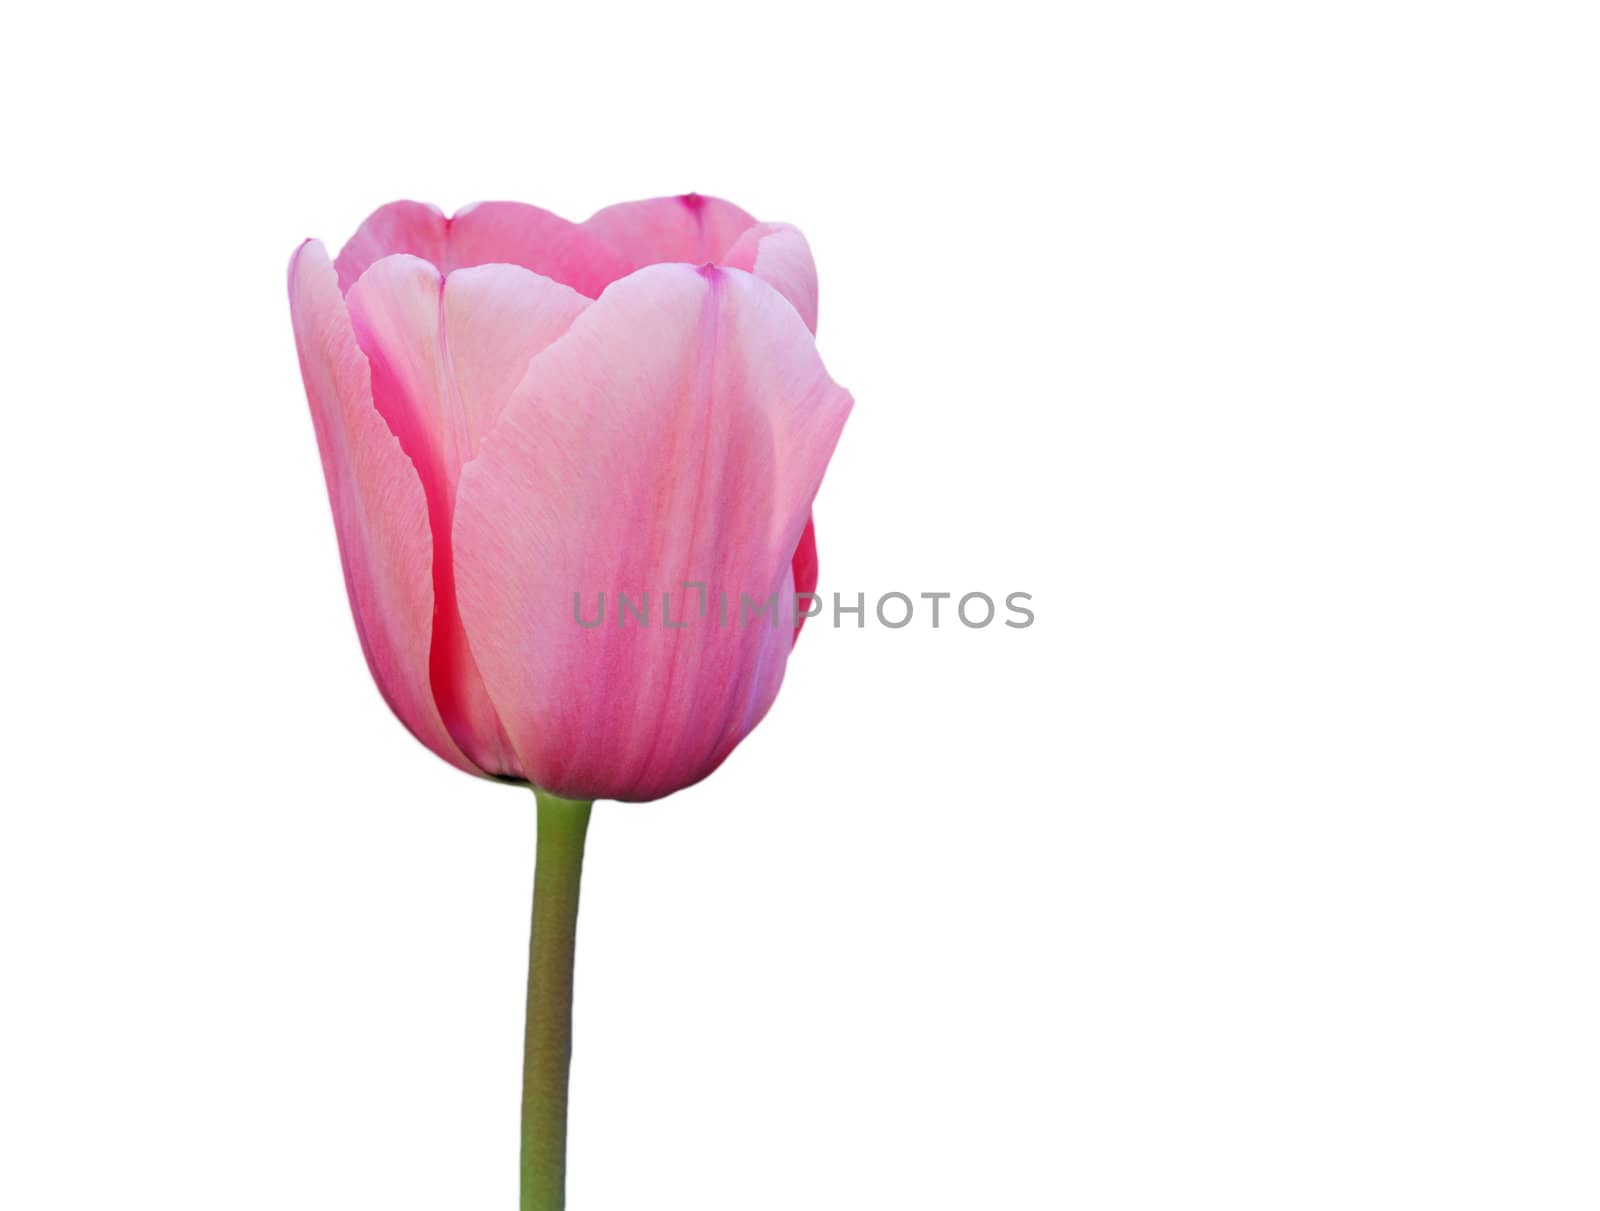 Beautiful pink tulip against white background. Clipping path provided